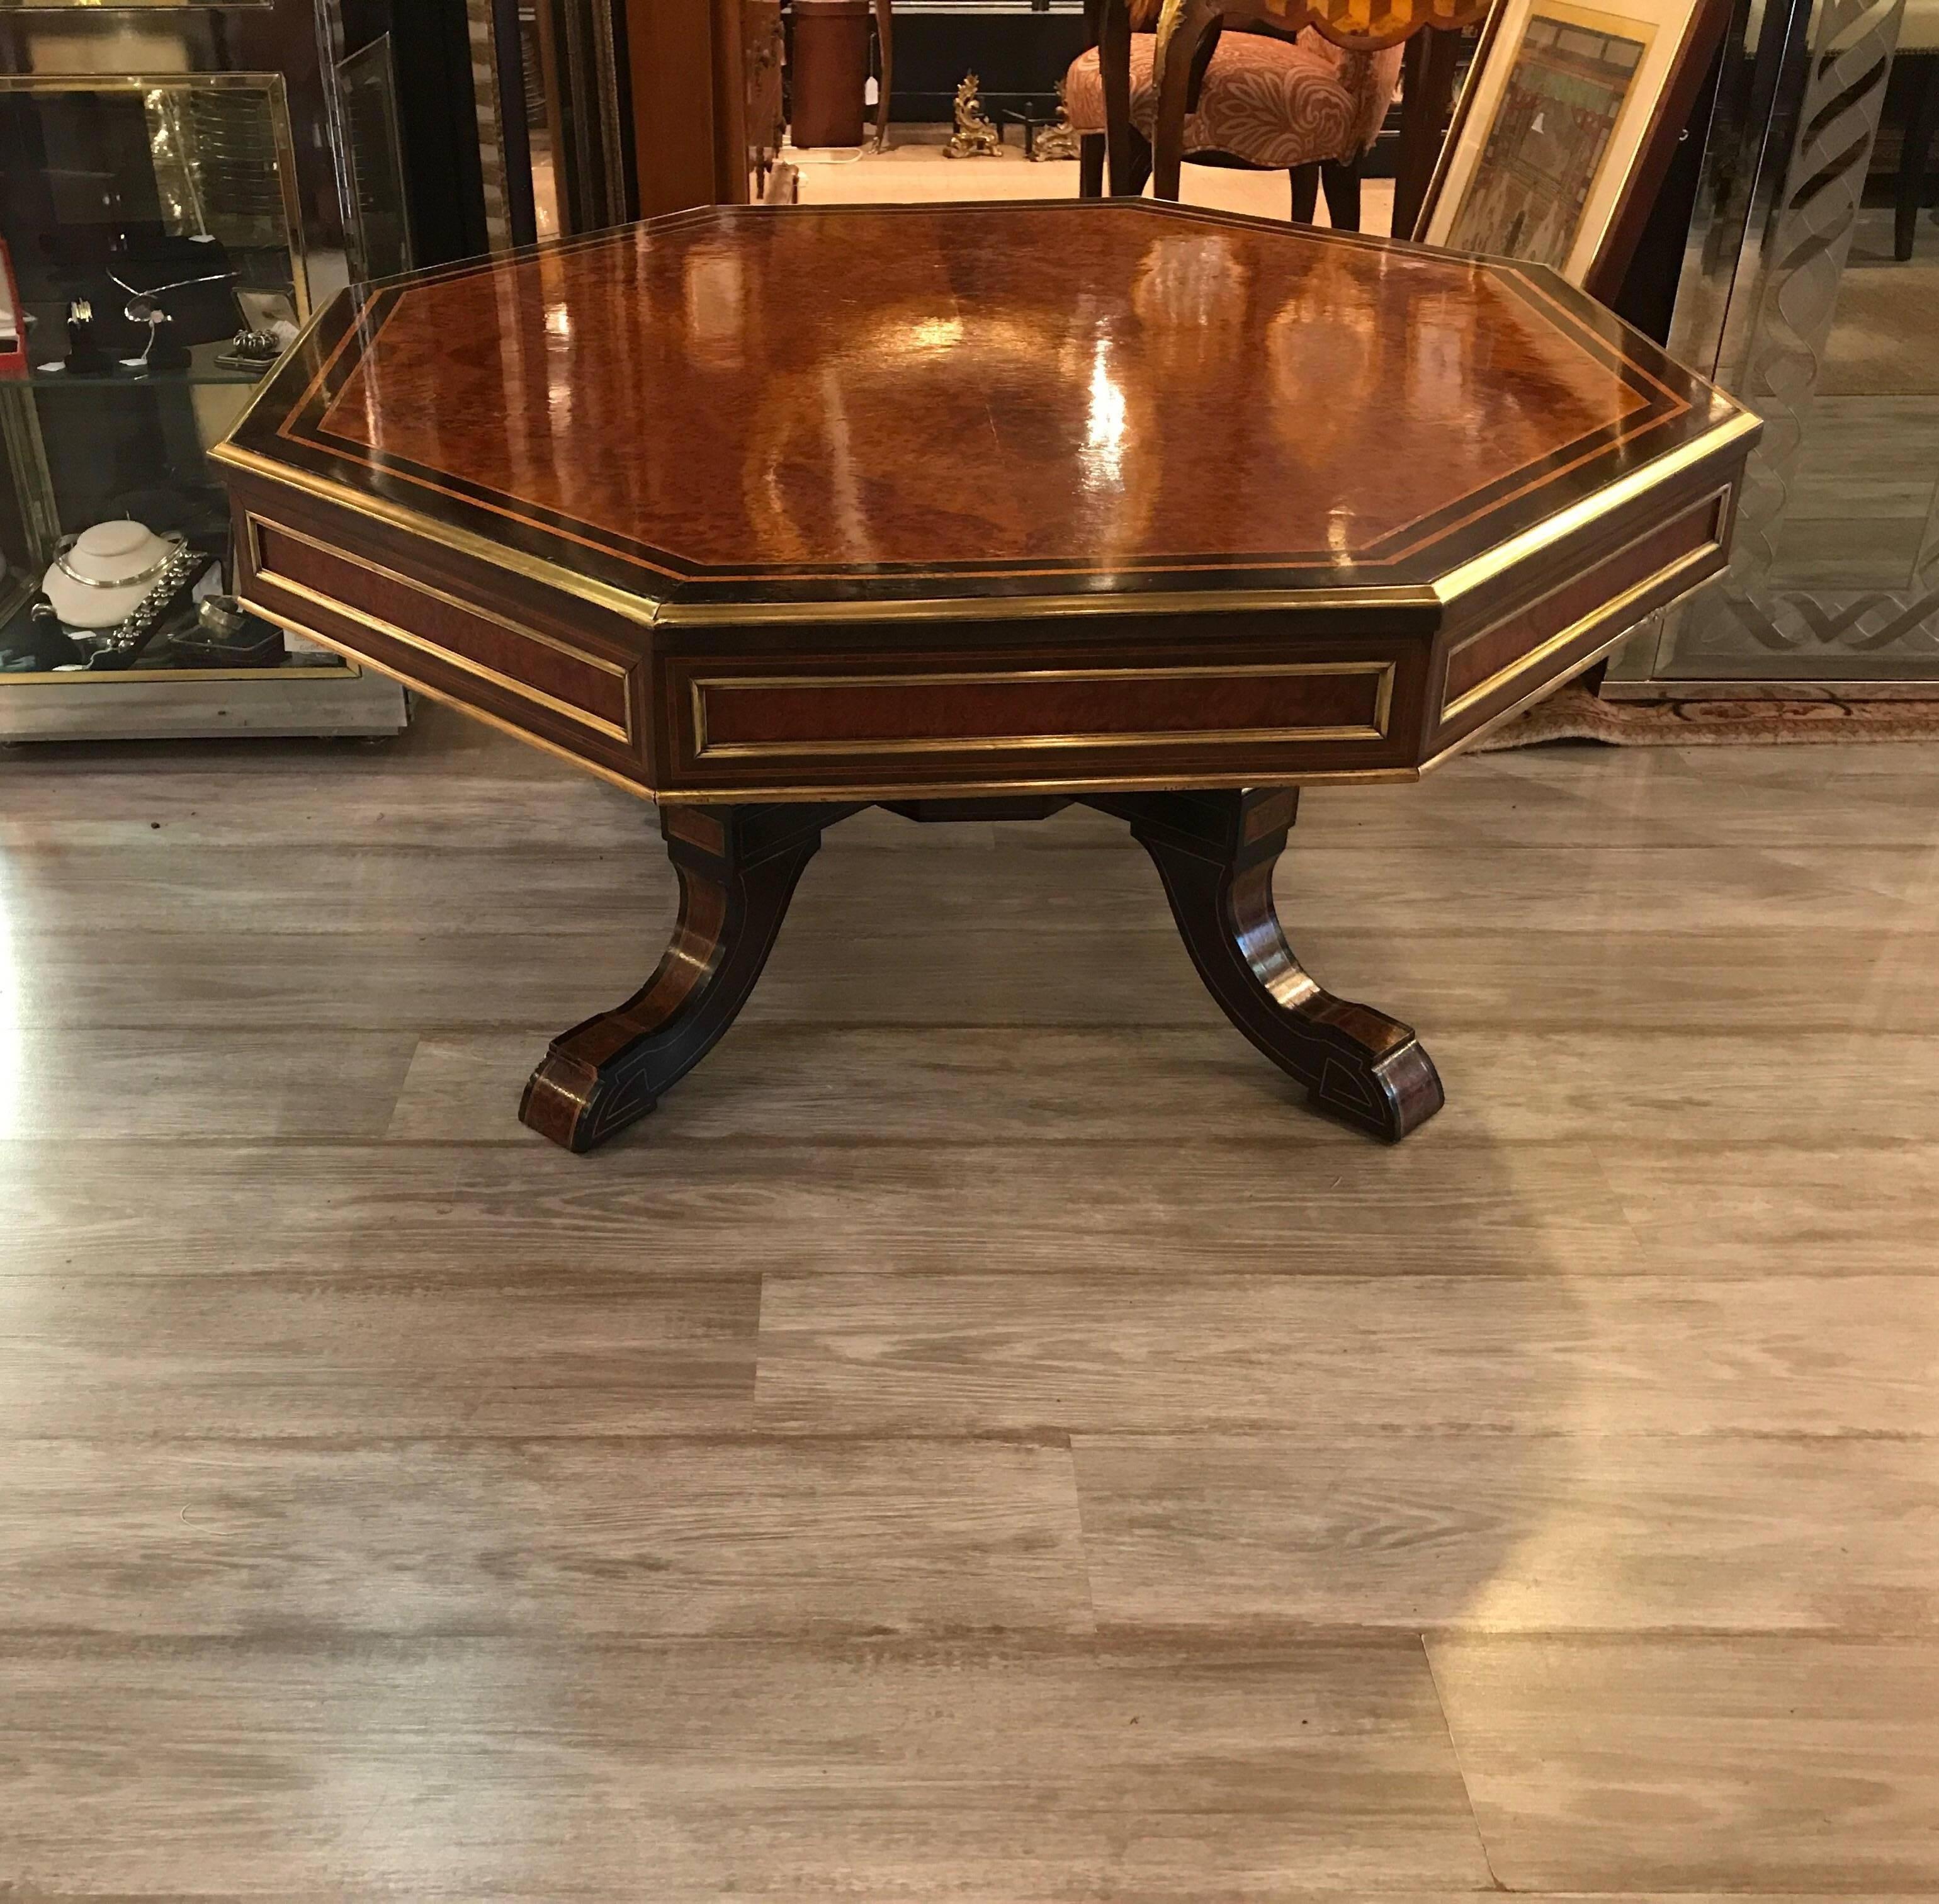 A burl walnut and rosewood hexagonal Napoleon III style coffee table with brass inlay and trim. The large top with burl wood surrounded by rosewood and satinwood. The edges with brass moldings as well as inlaid on the detailed base. Stunning table